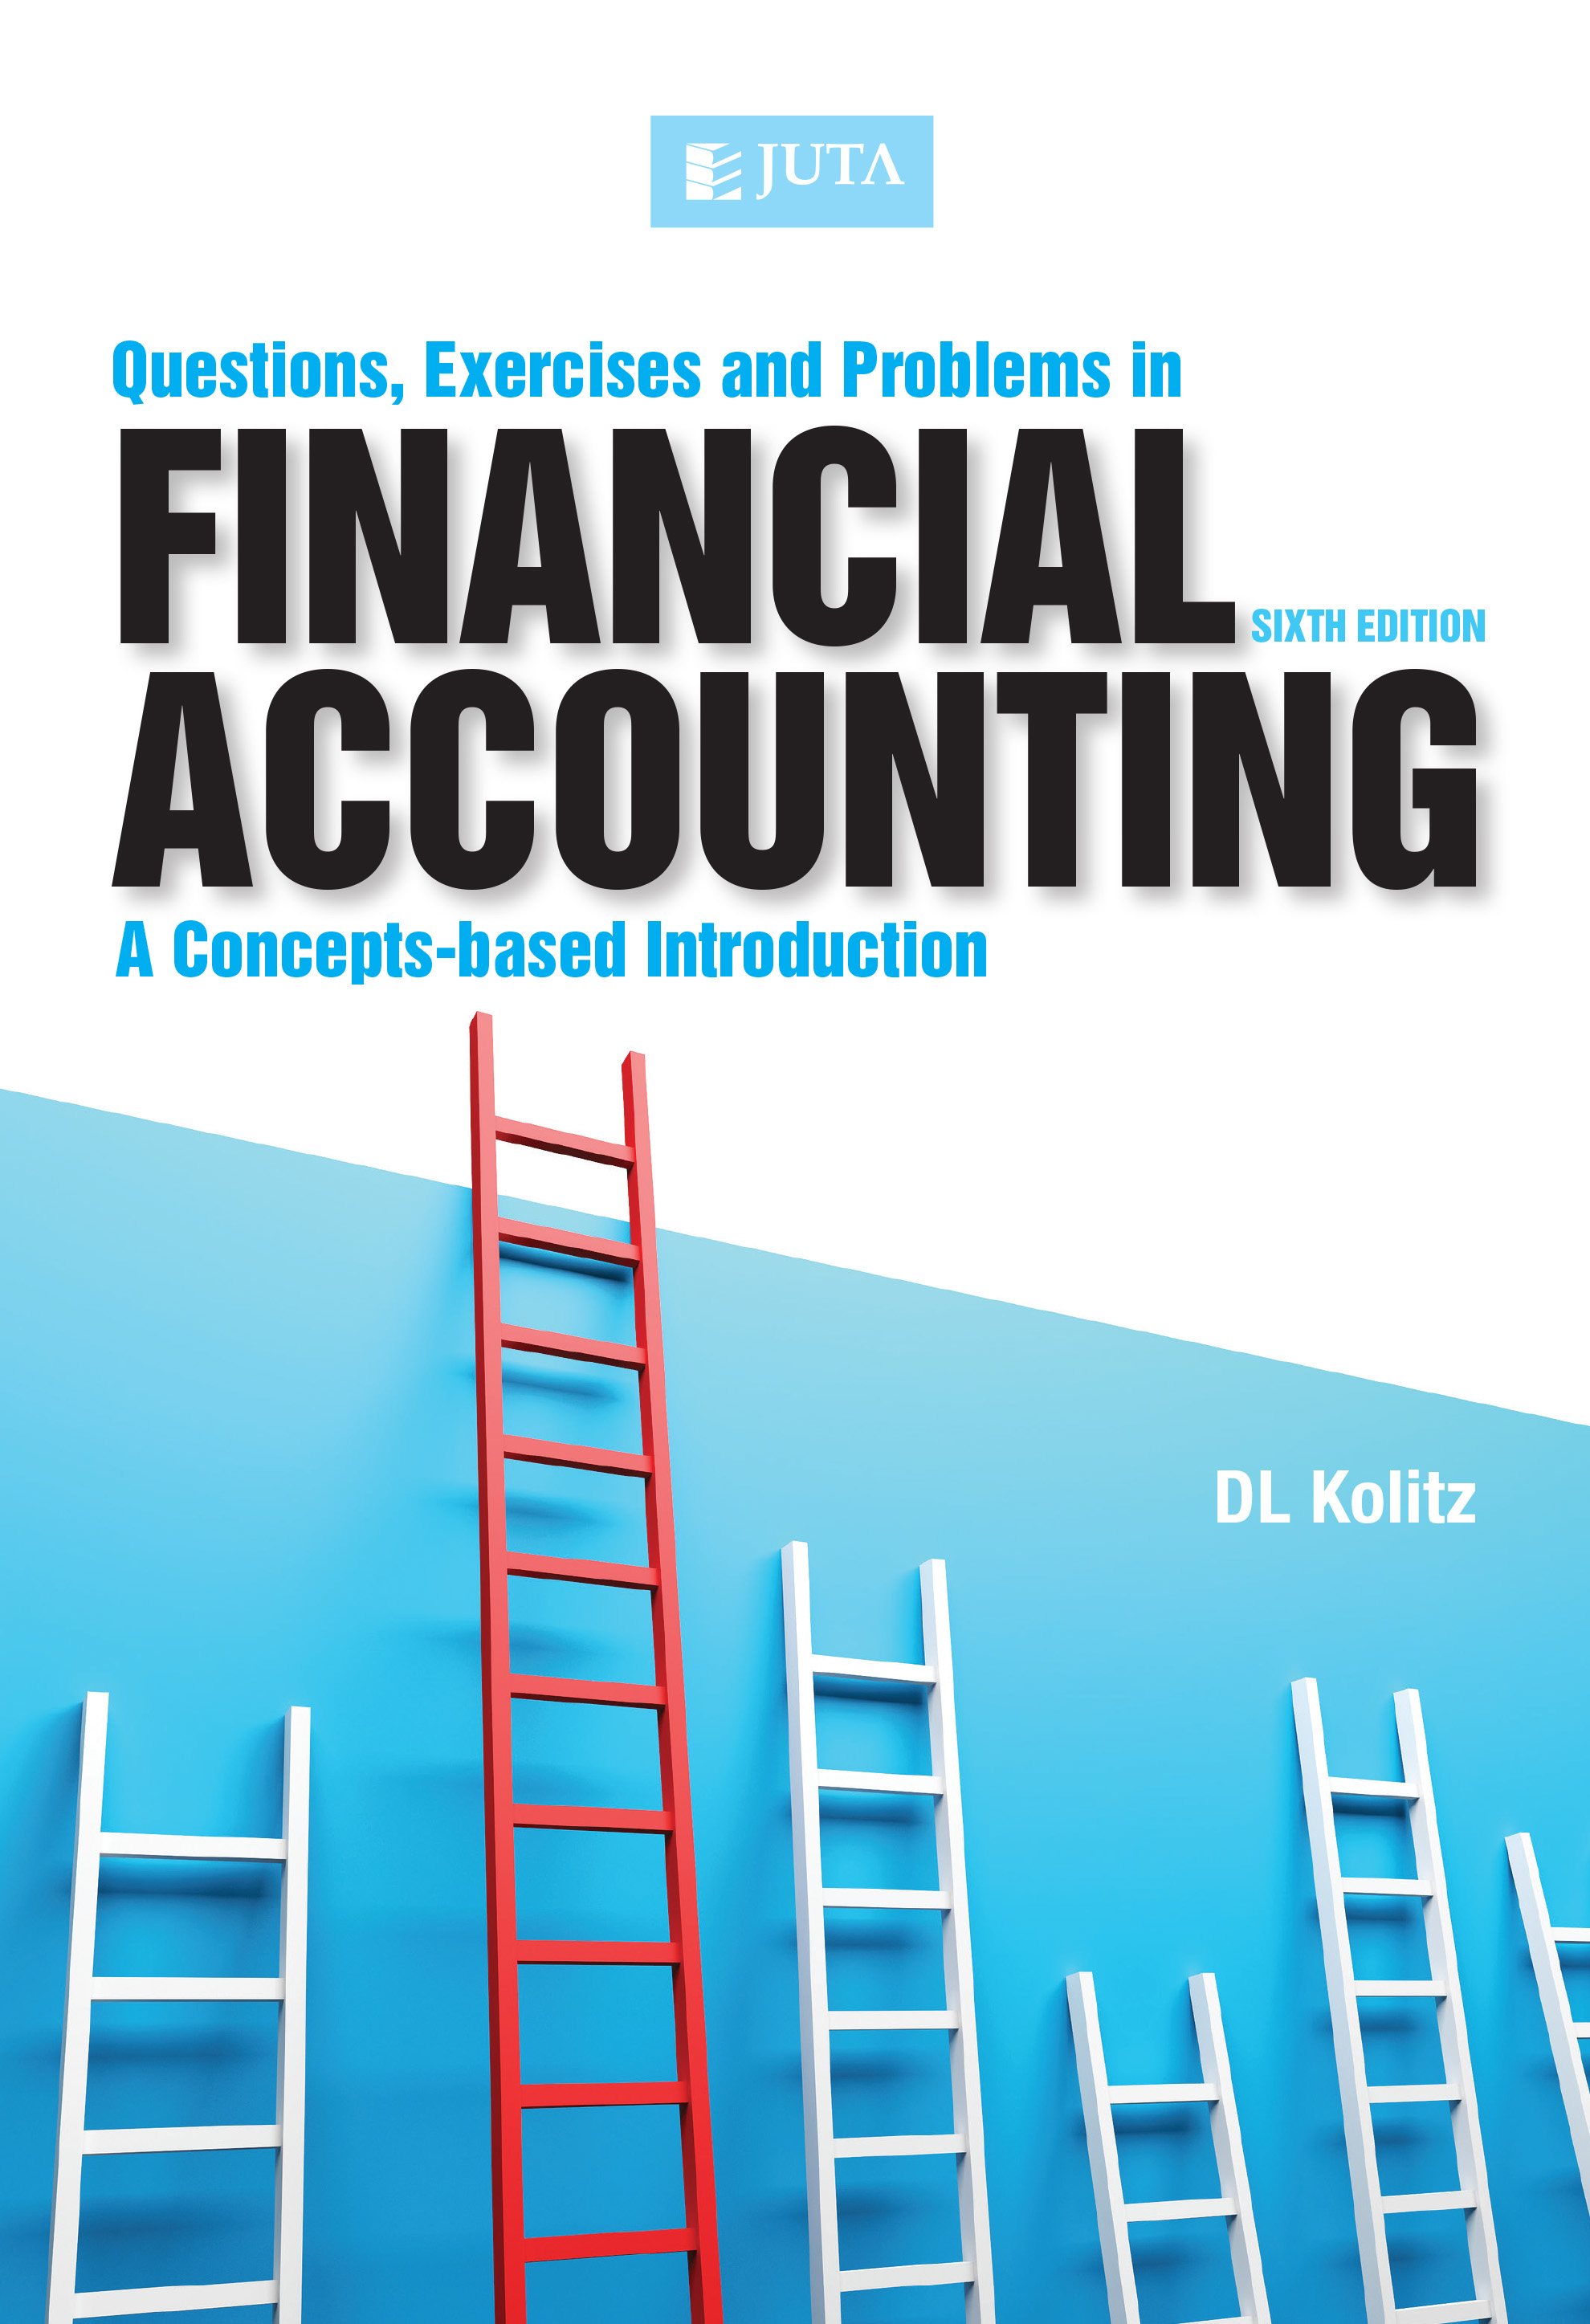 Questions, Exercises and Problems in Financial Accounting: A Concepts-based introduction